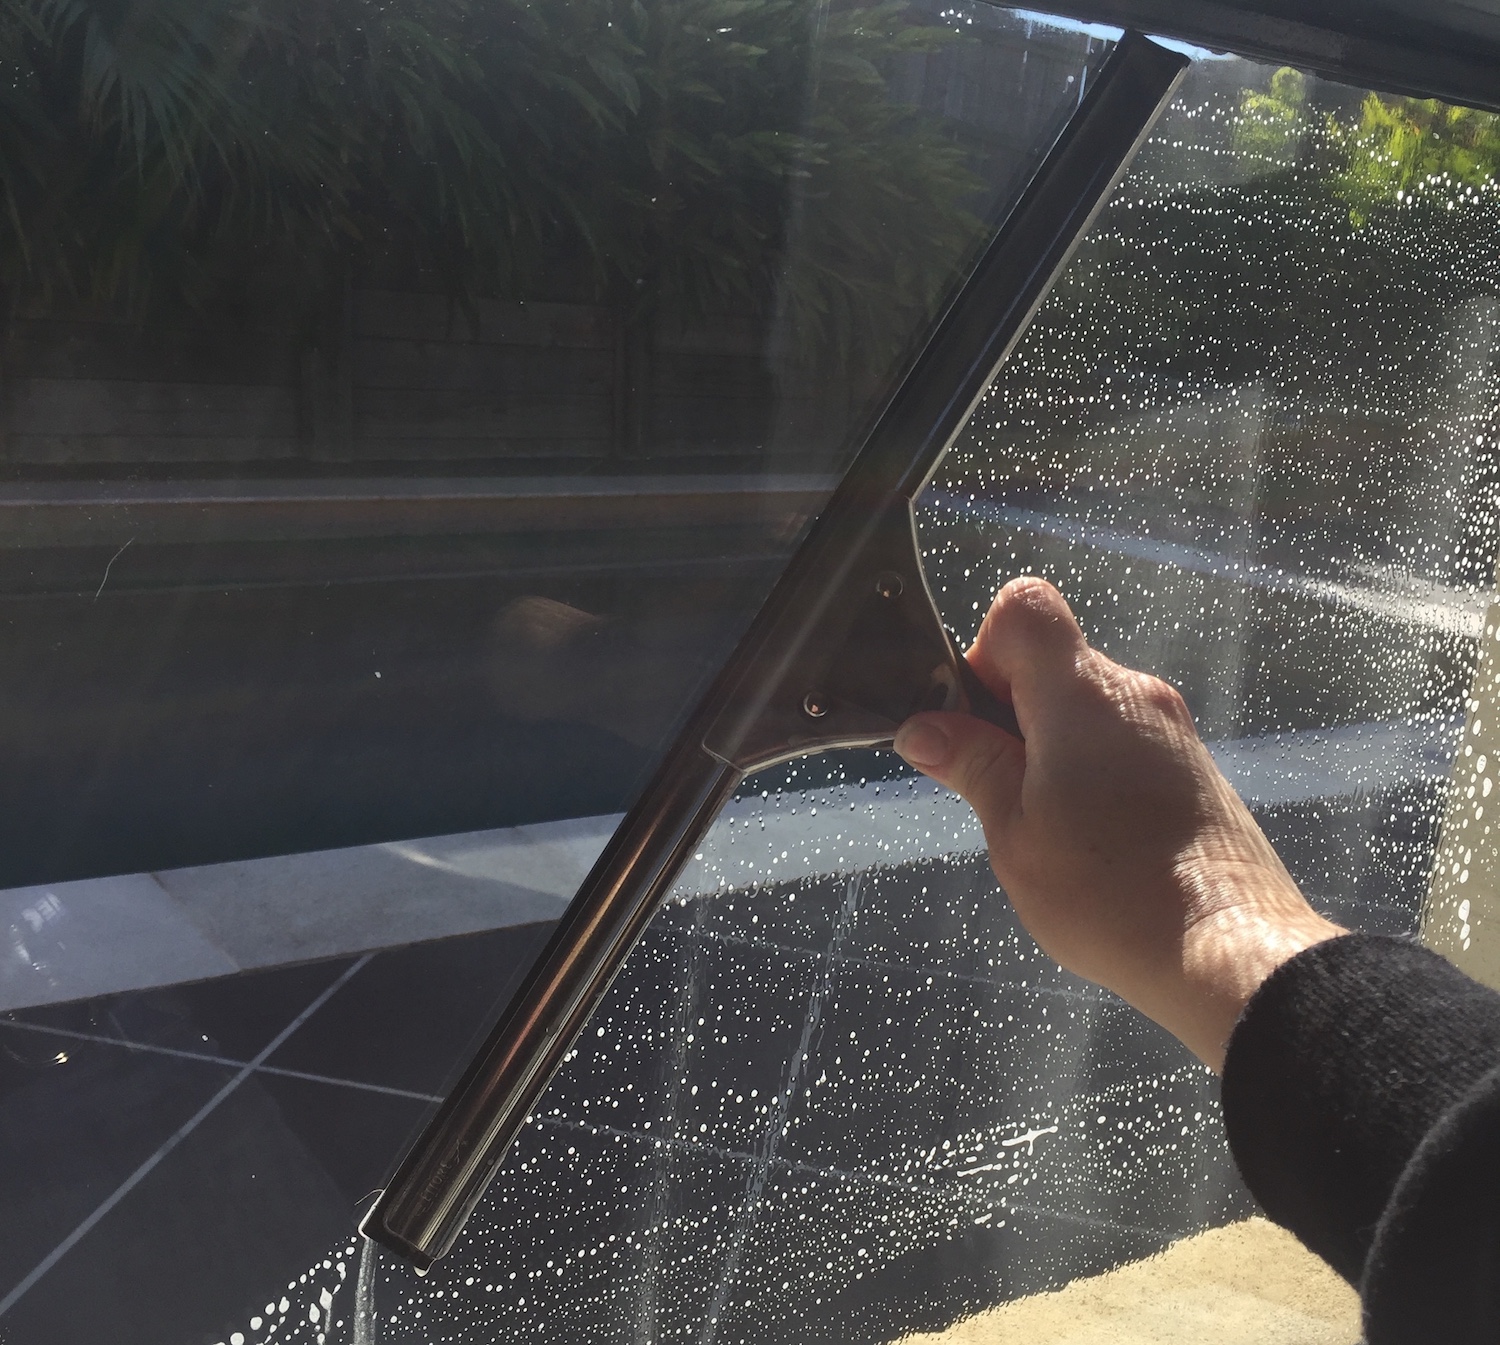 Cleaning Windows Quickly and Efficiently